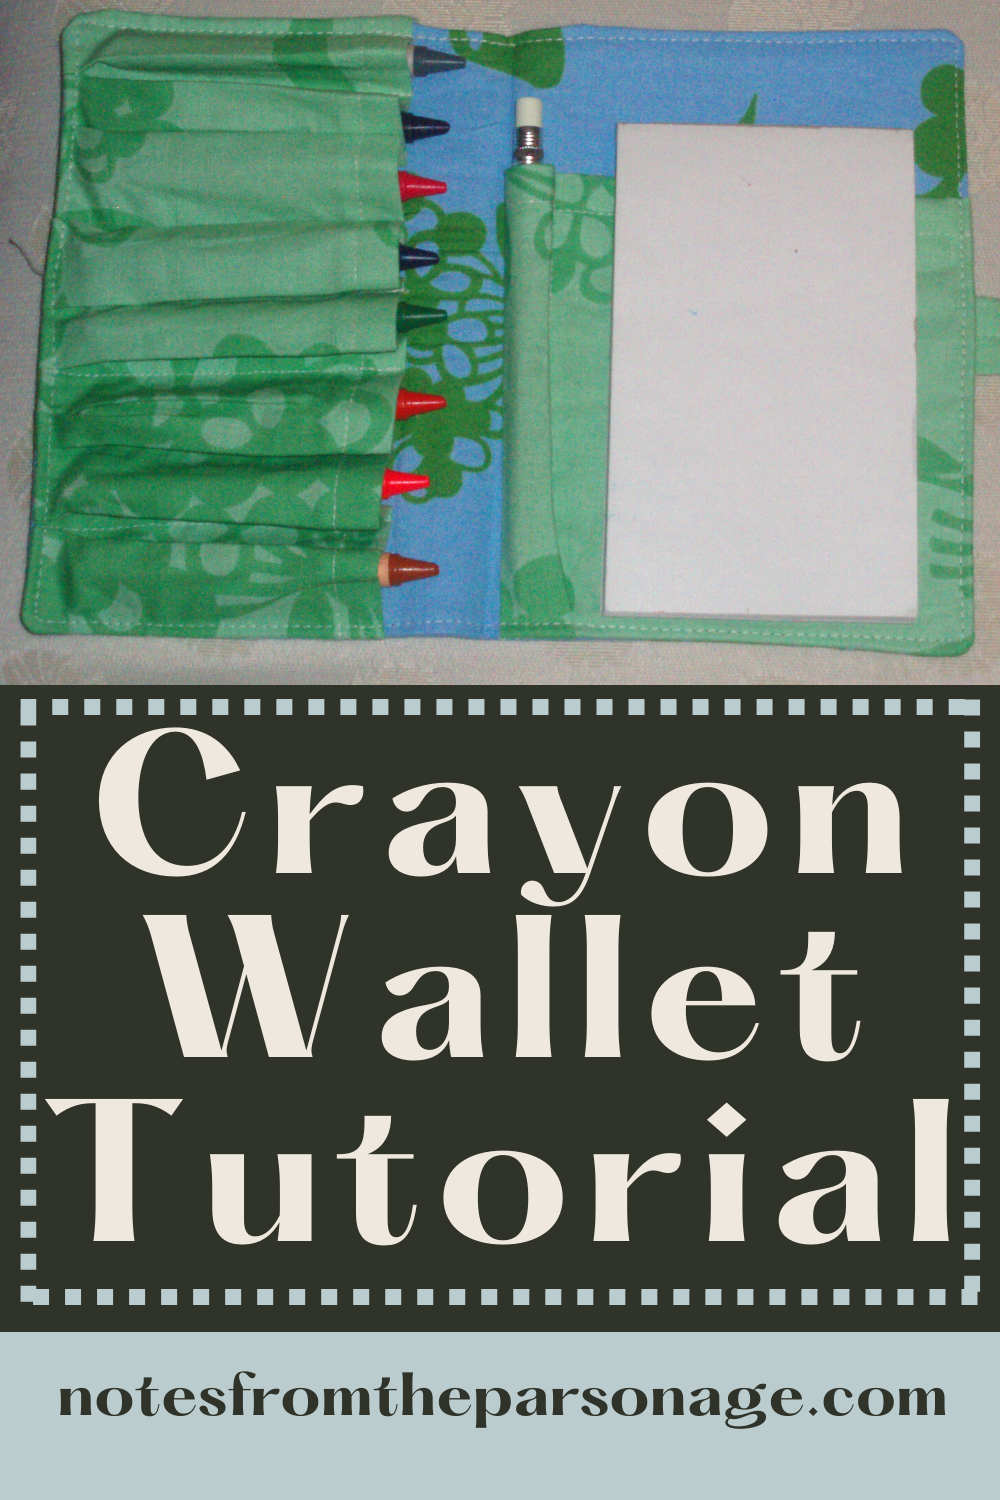 Crayon wallet tutorial with image of inside of finished crayon wallet.